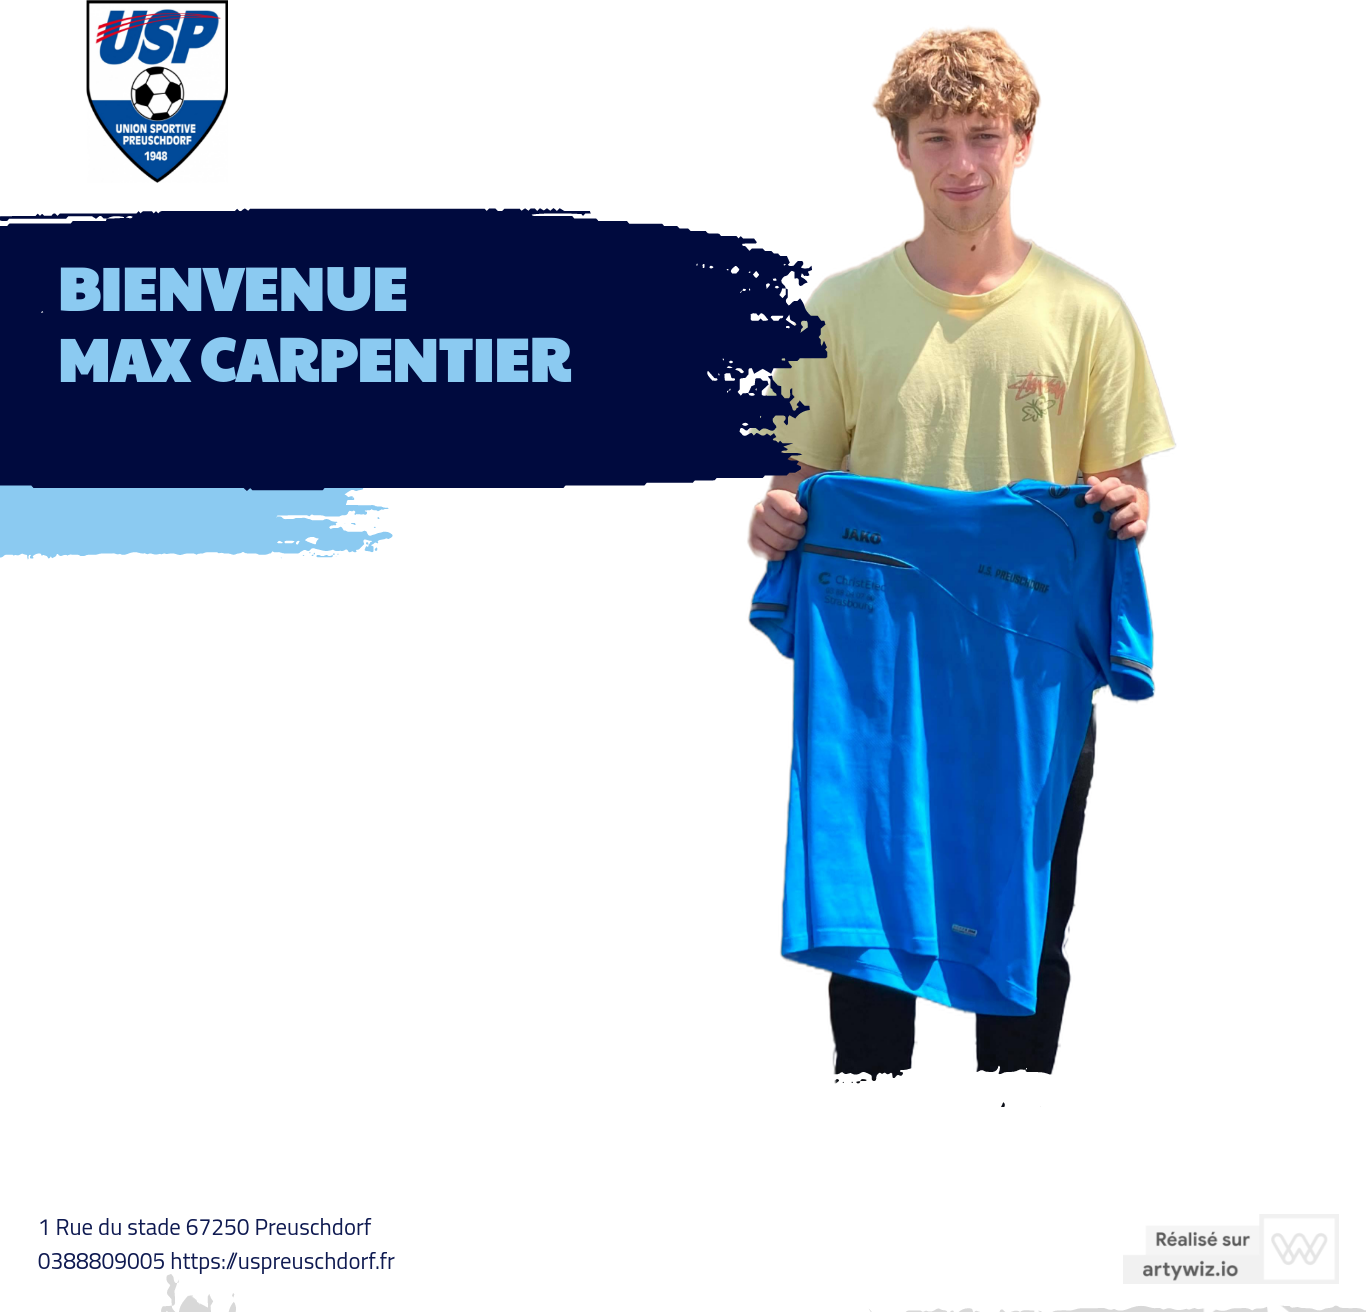 You are currently viewing Nouveau joueur: Max Carpentier